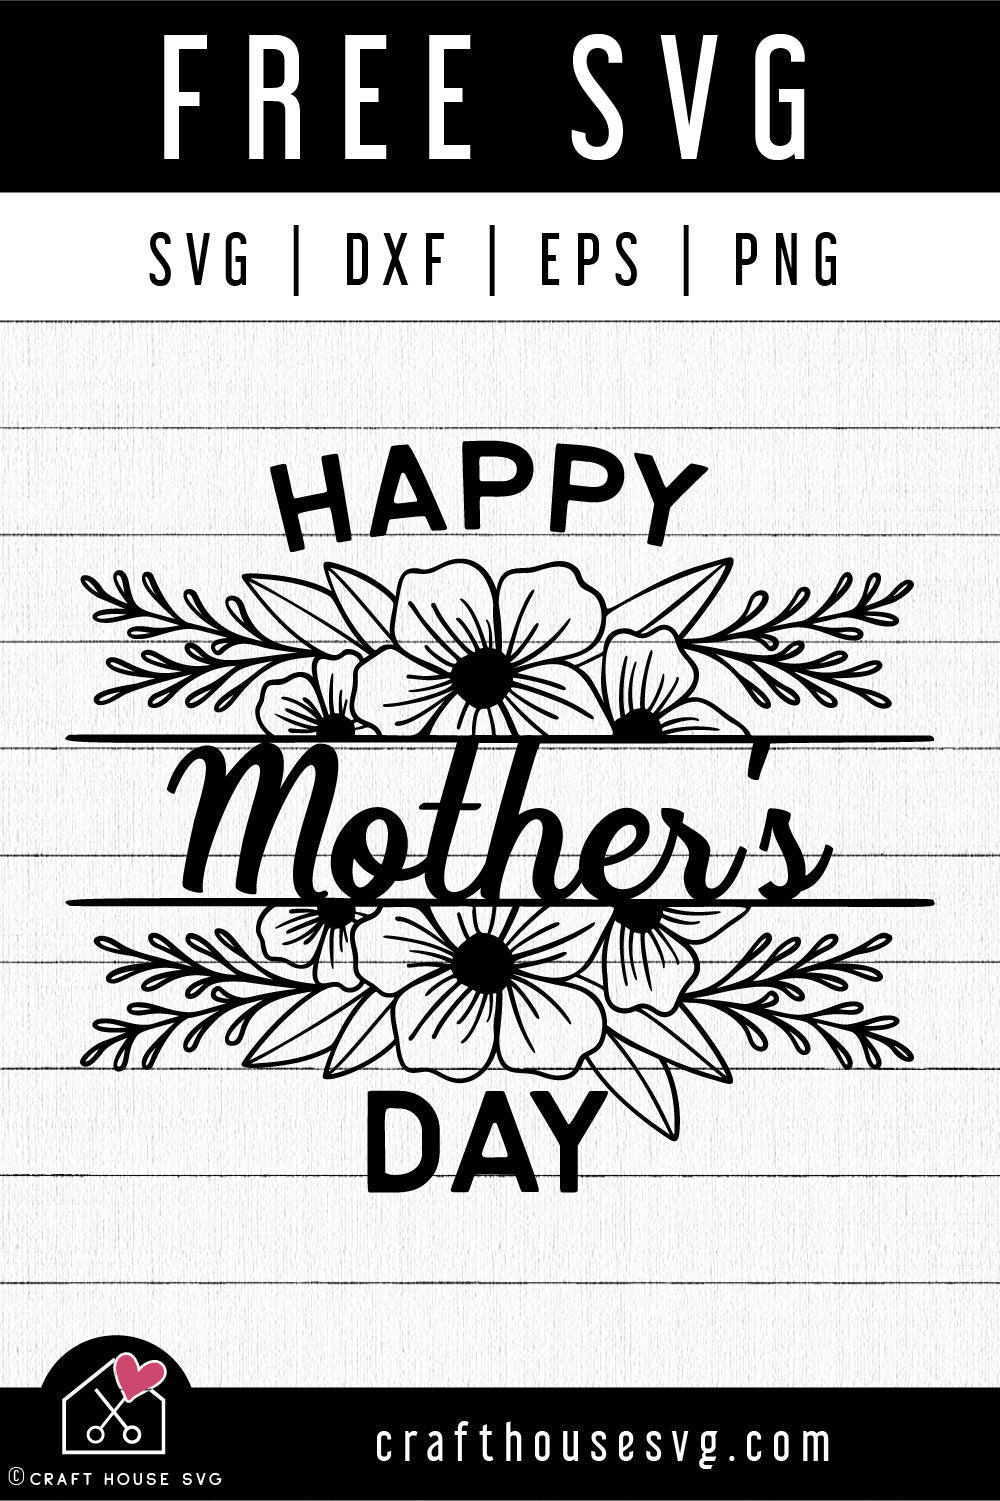 Download Free Happy Mothers Day Svg Mothers Day Svg Craft House Svg